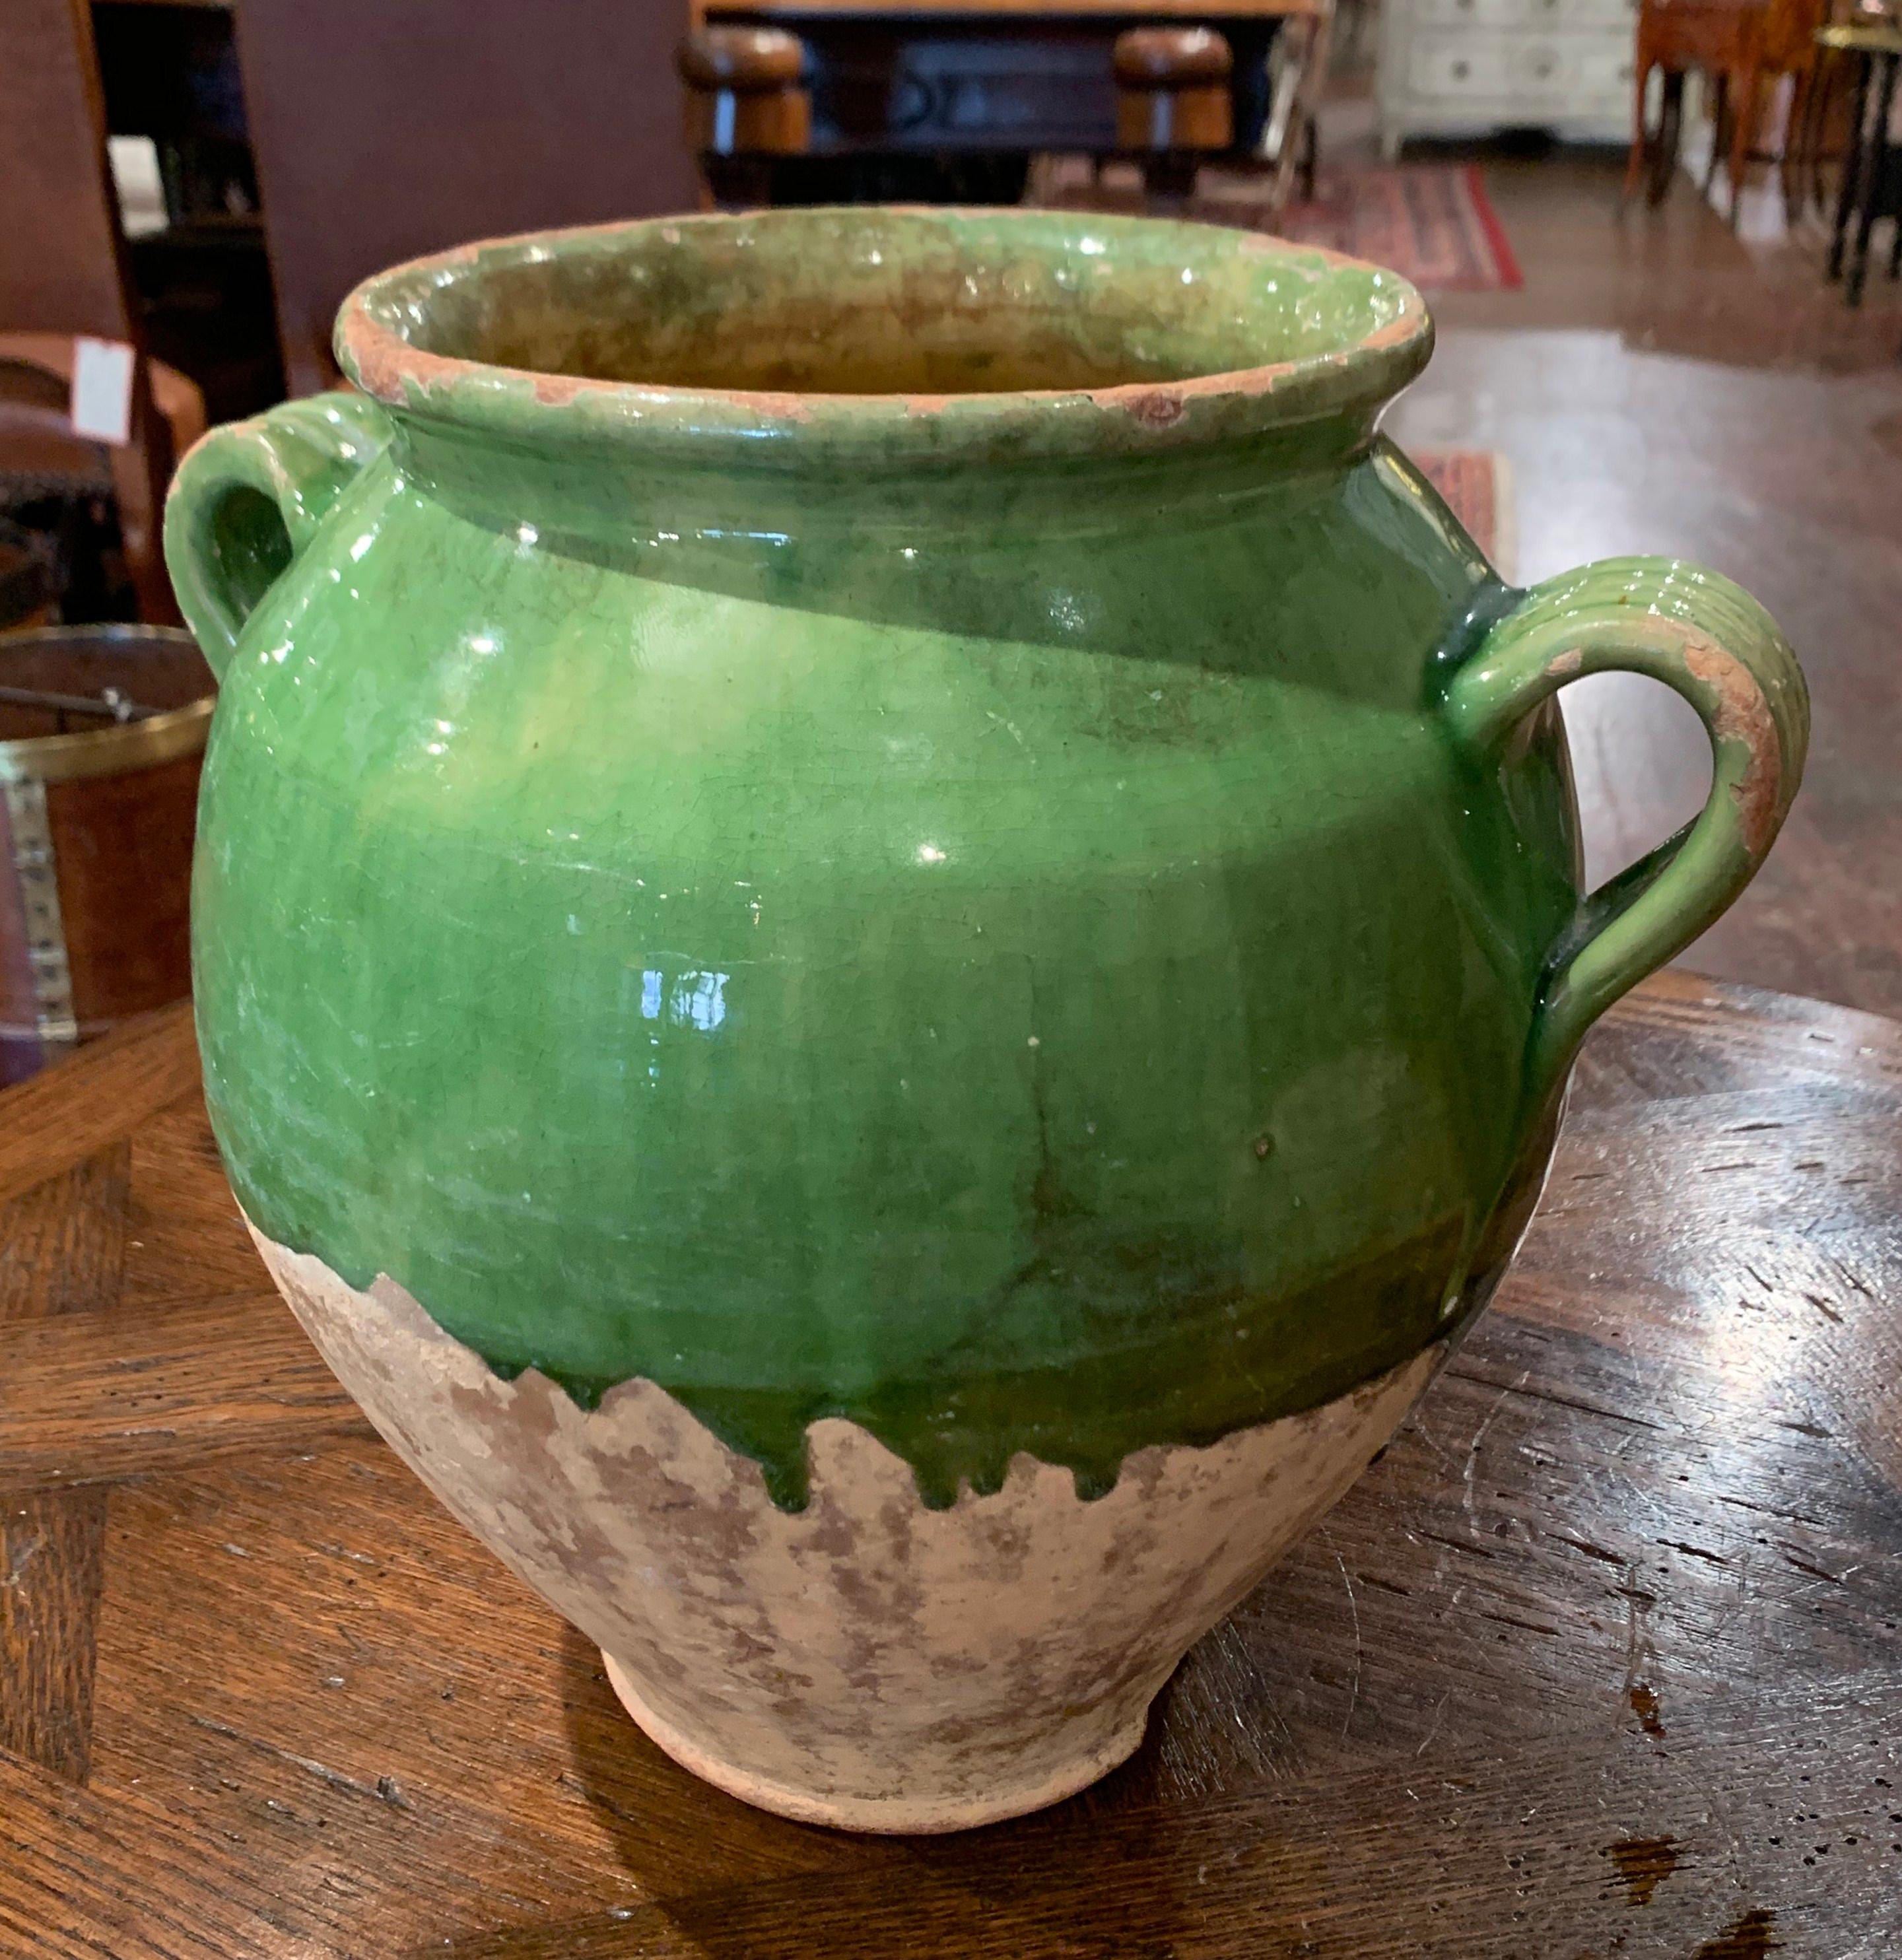 Hard to find with green glazing, this colorful French confit pot with a glaze upper portion was created in the Perigord region of France, circa 1870. Made of earthenware, these traditional vessels were once used daily in the French country home for